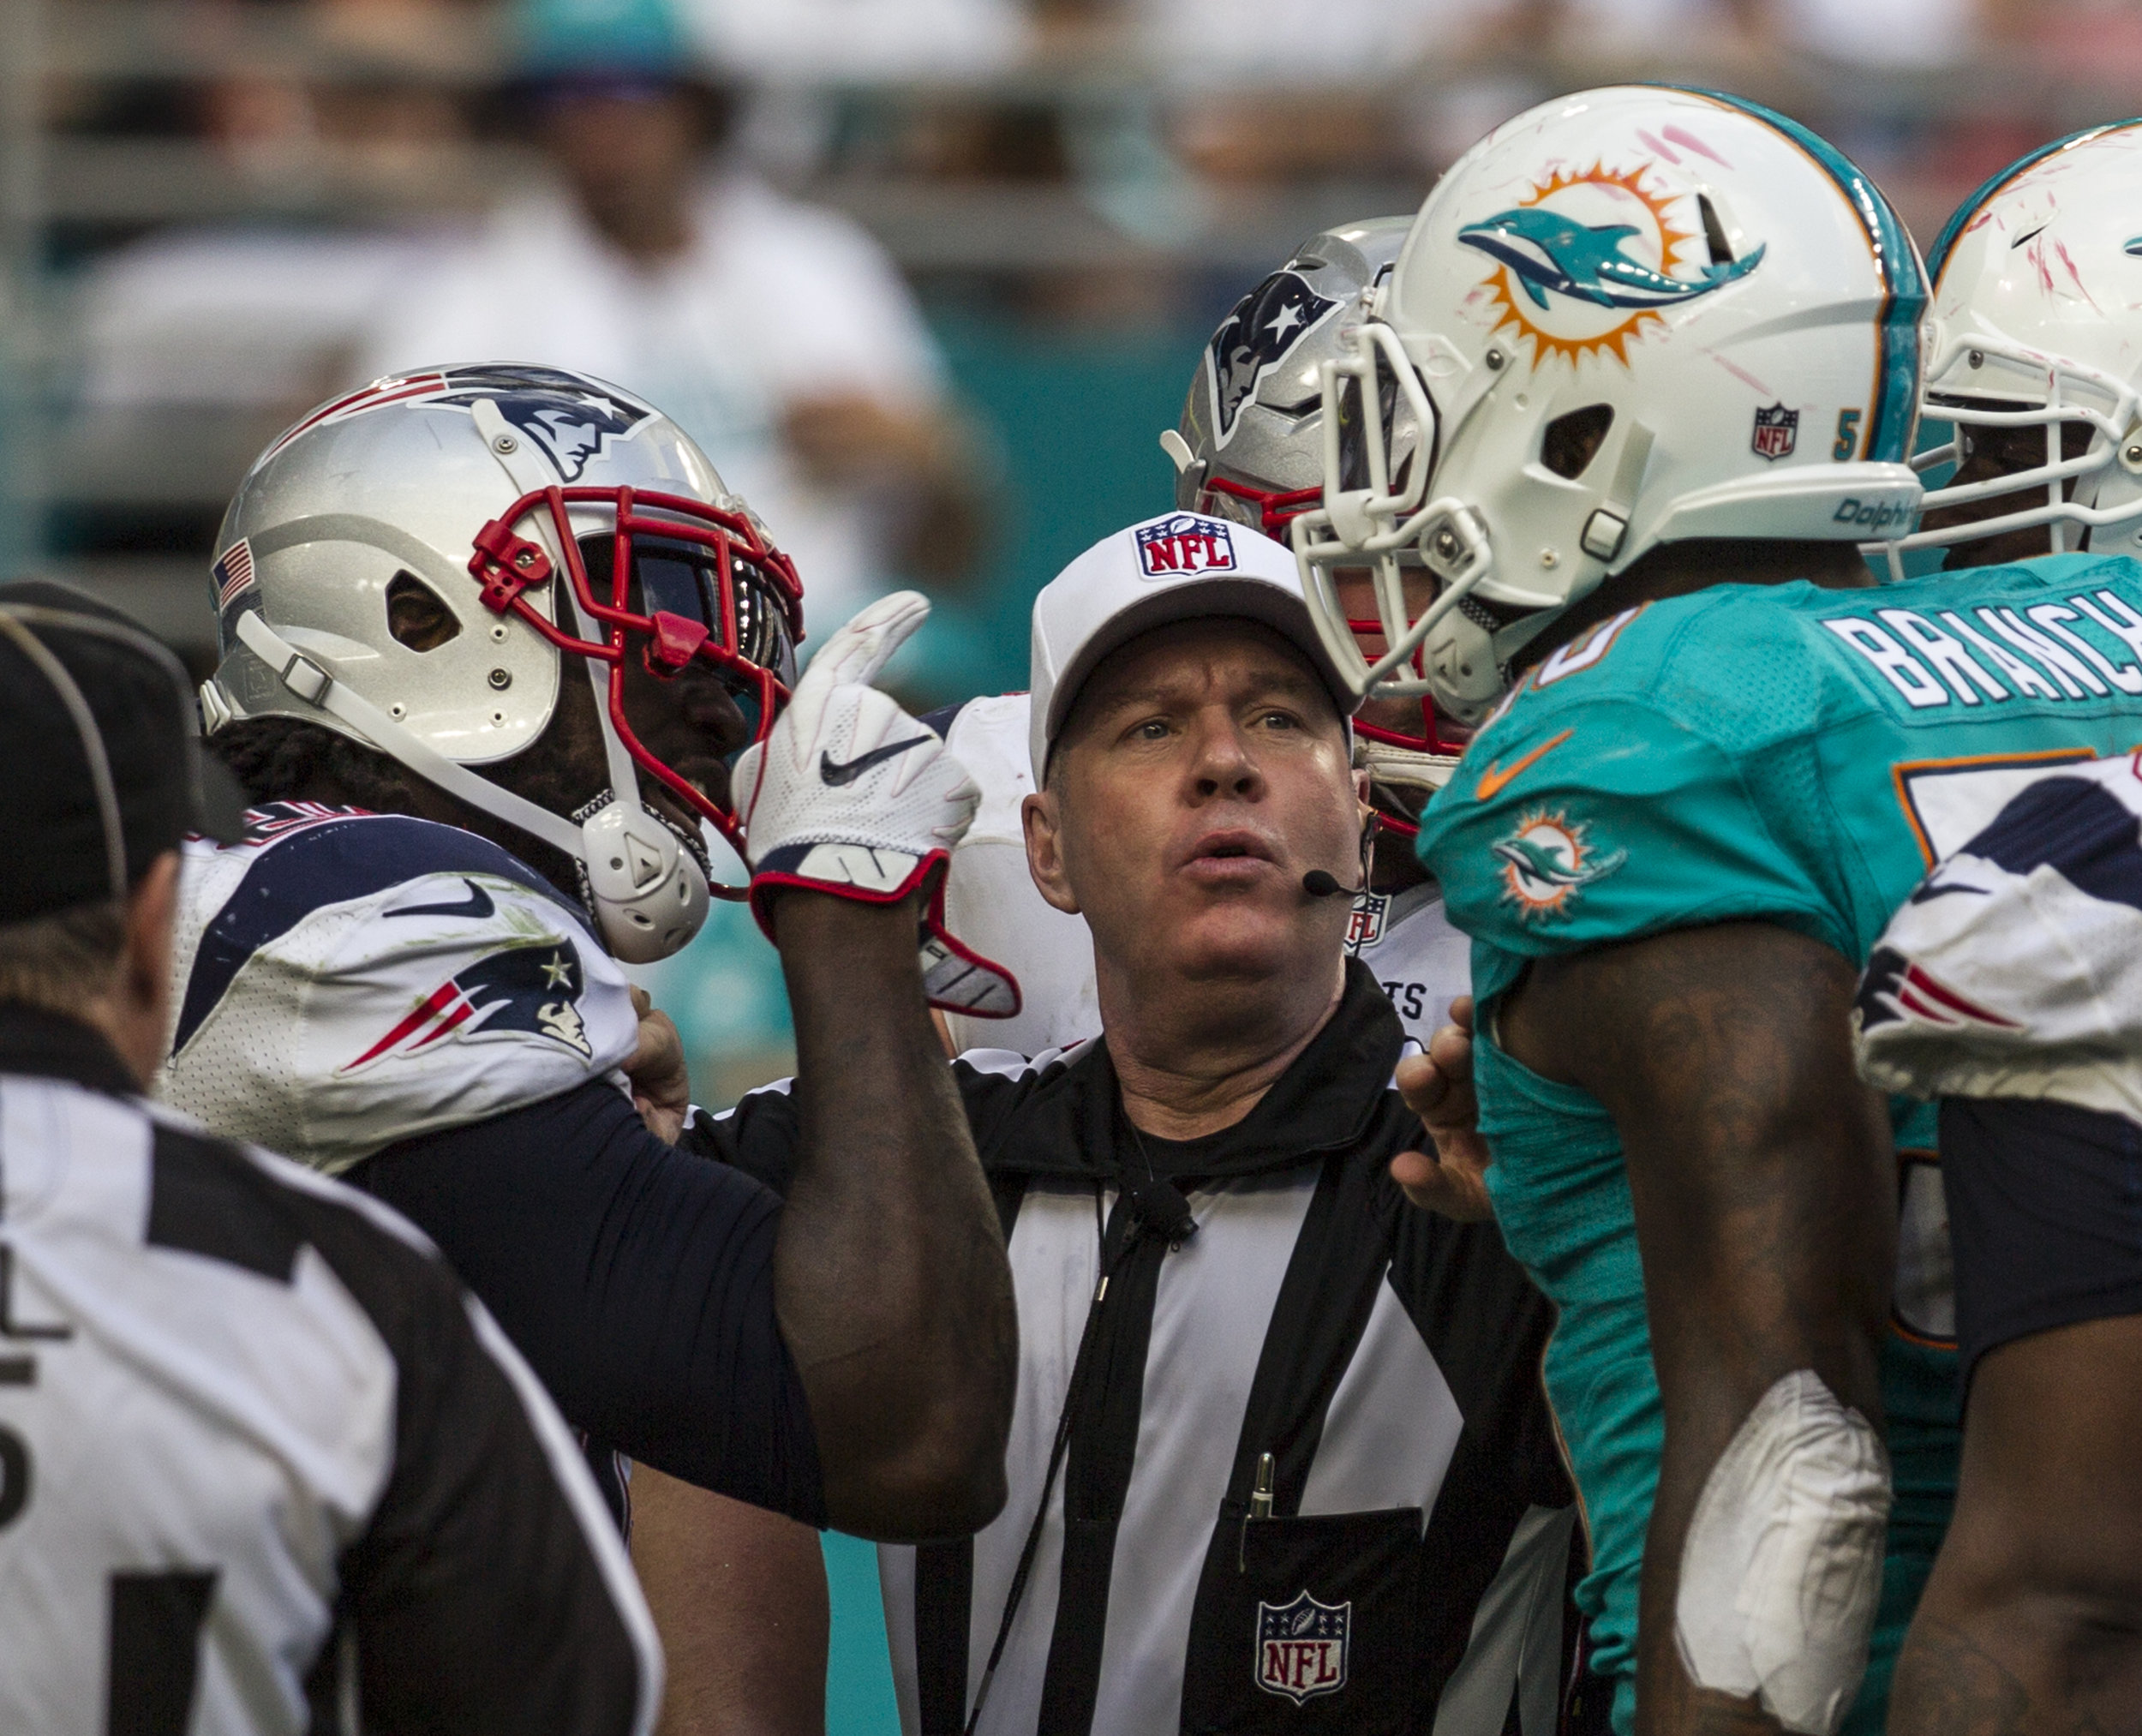  New England Patriots running back LeGarrette Blount argues with the Miami Dolphins defensive line after a play at Hard Rock Stadium in Miami Gardens, Florida, January 1, 2017. 